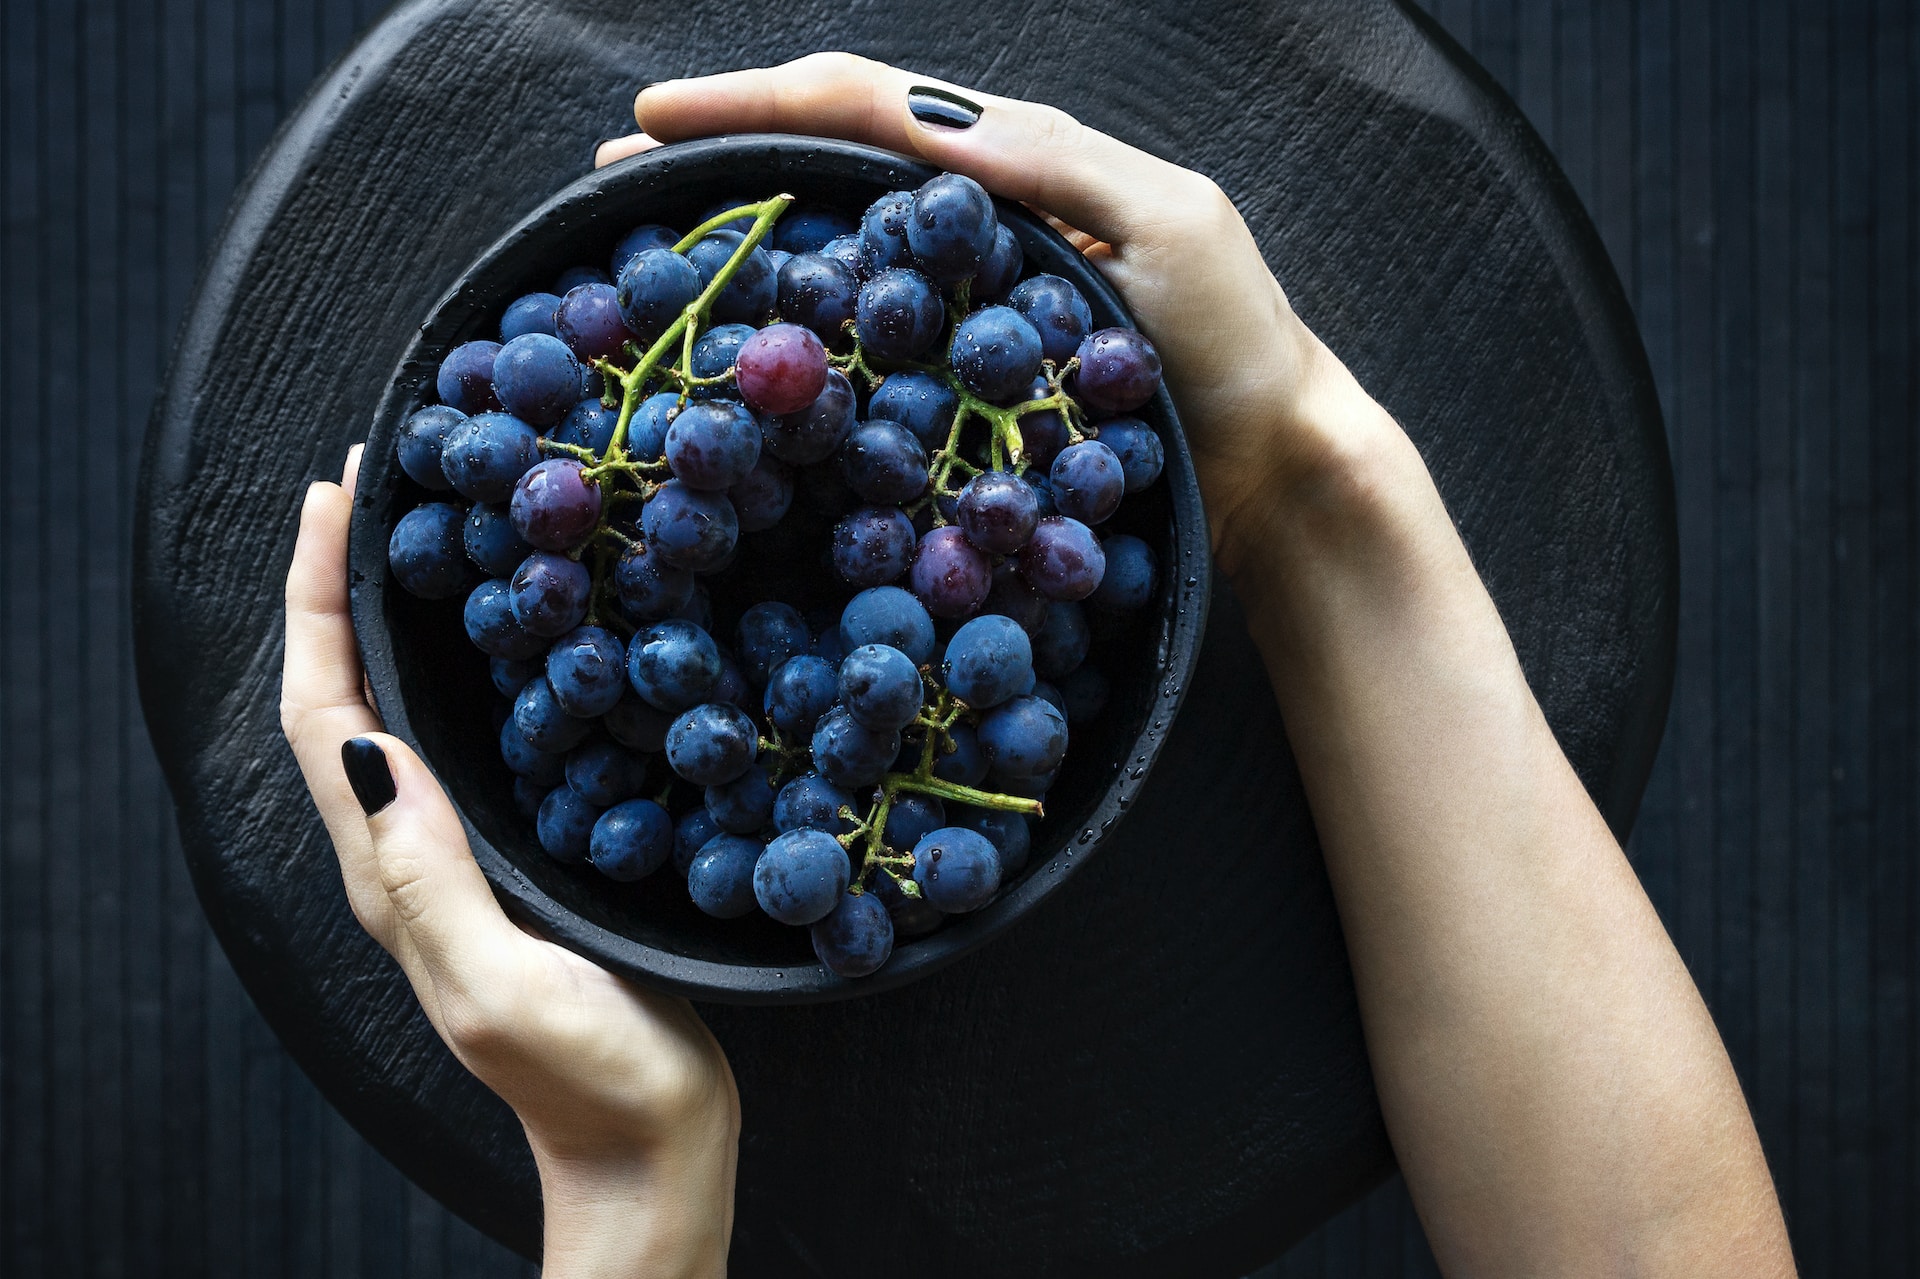 Blue Grapes, Purple Grapes, Wellness, Grapes In A Bowl, Bowl Of Grapes, Health, Wellness, Holistic, Vine, Fresh Fruit, Ripe Grapes, Healthy Eating